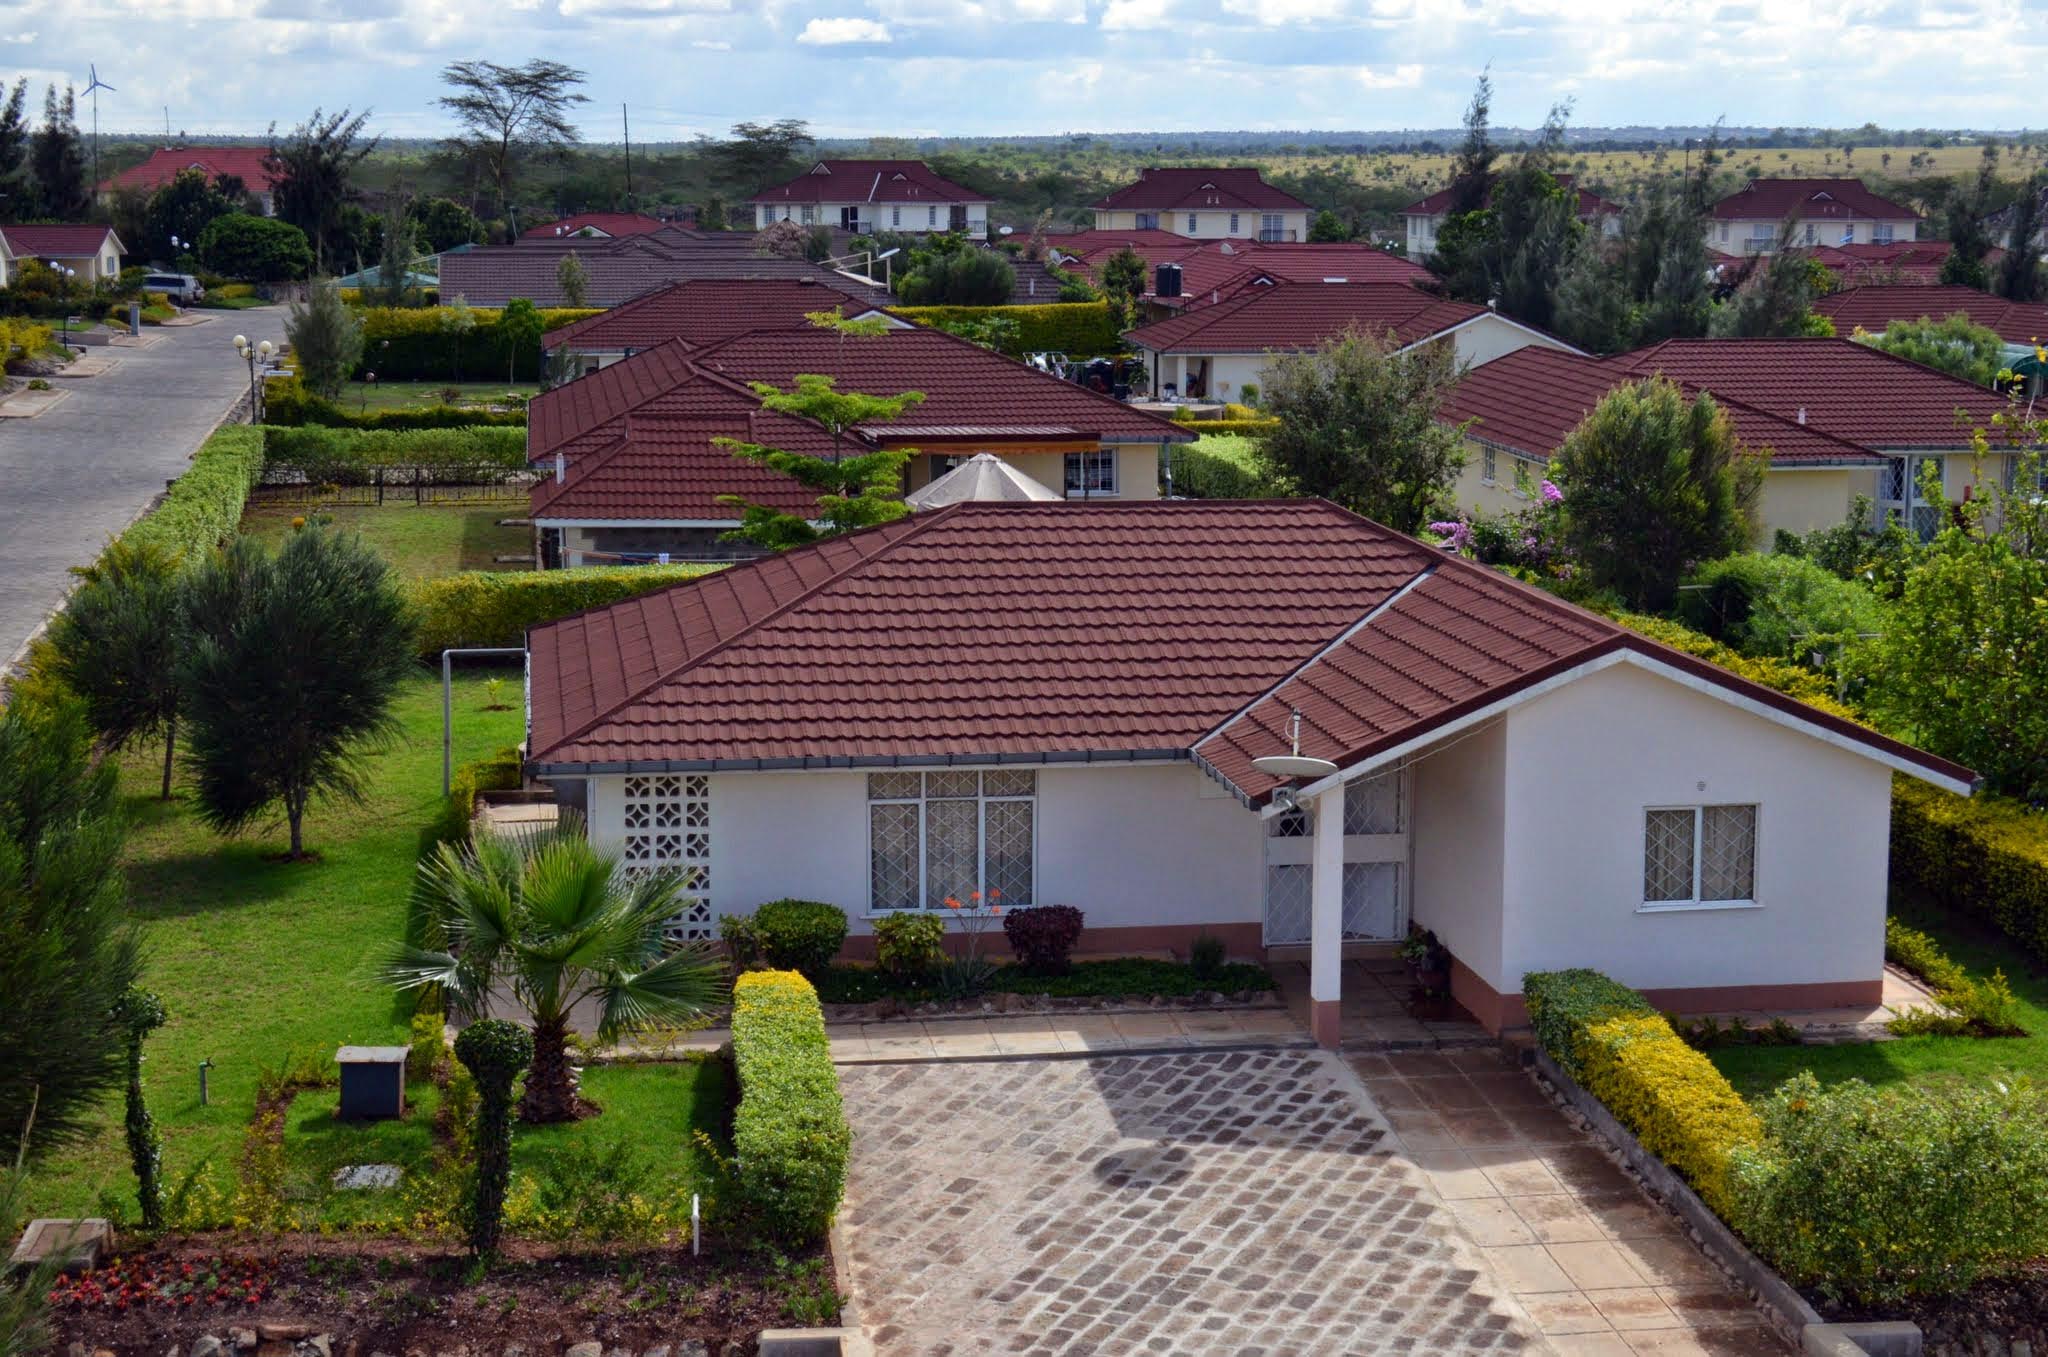 And finally... Scots architect helps bring assisted living to Kenya